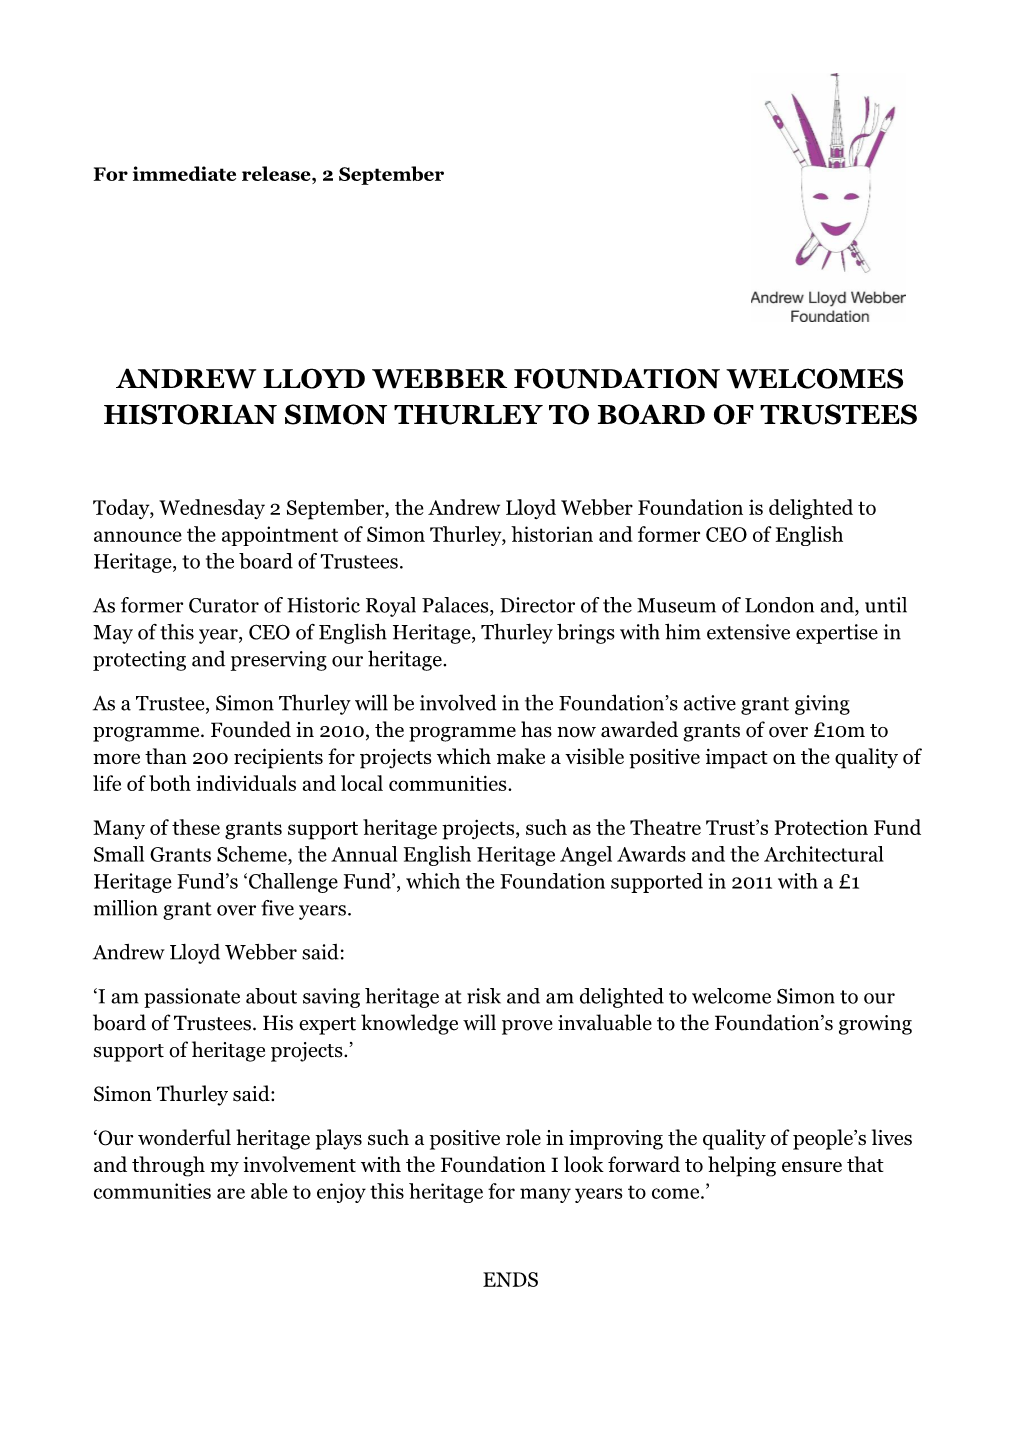 Andrew Lloyd Webber Foundation Welcomes Historian Simon Thurley to Board of Trustees